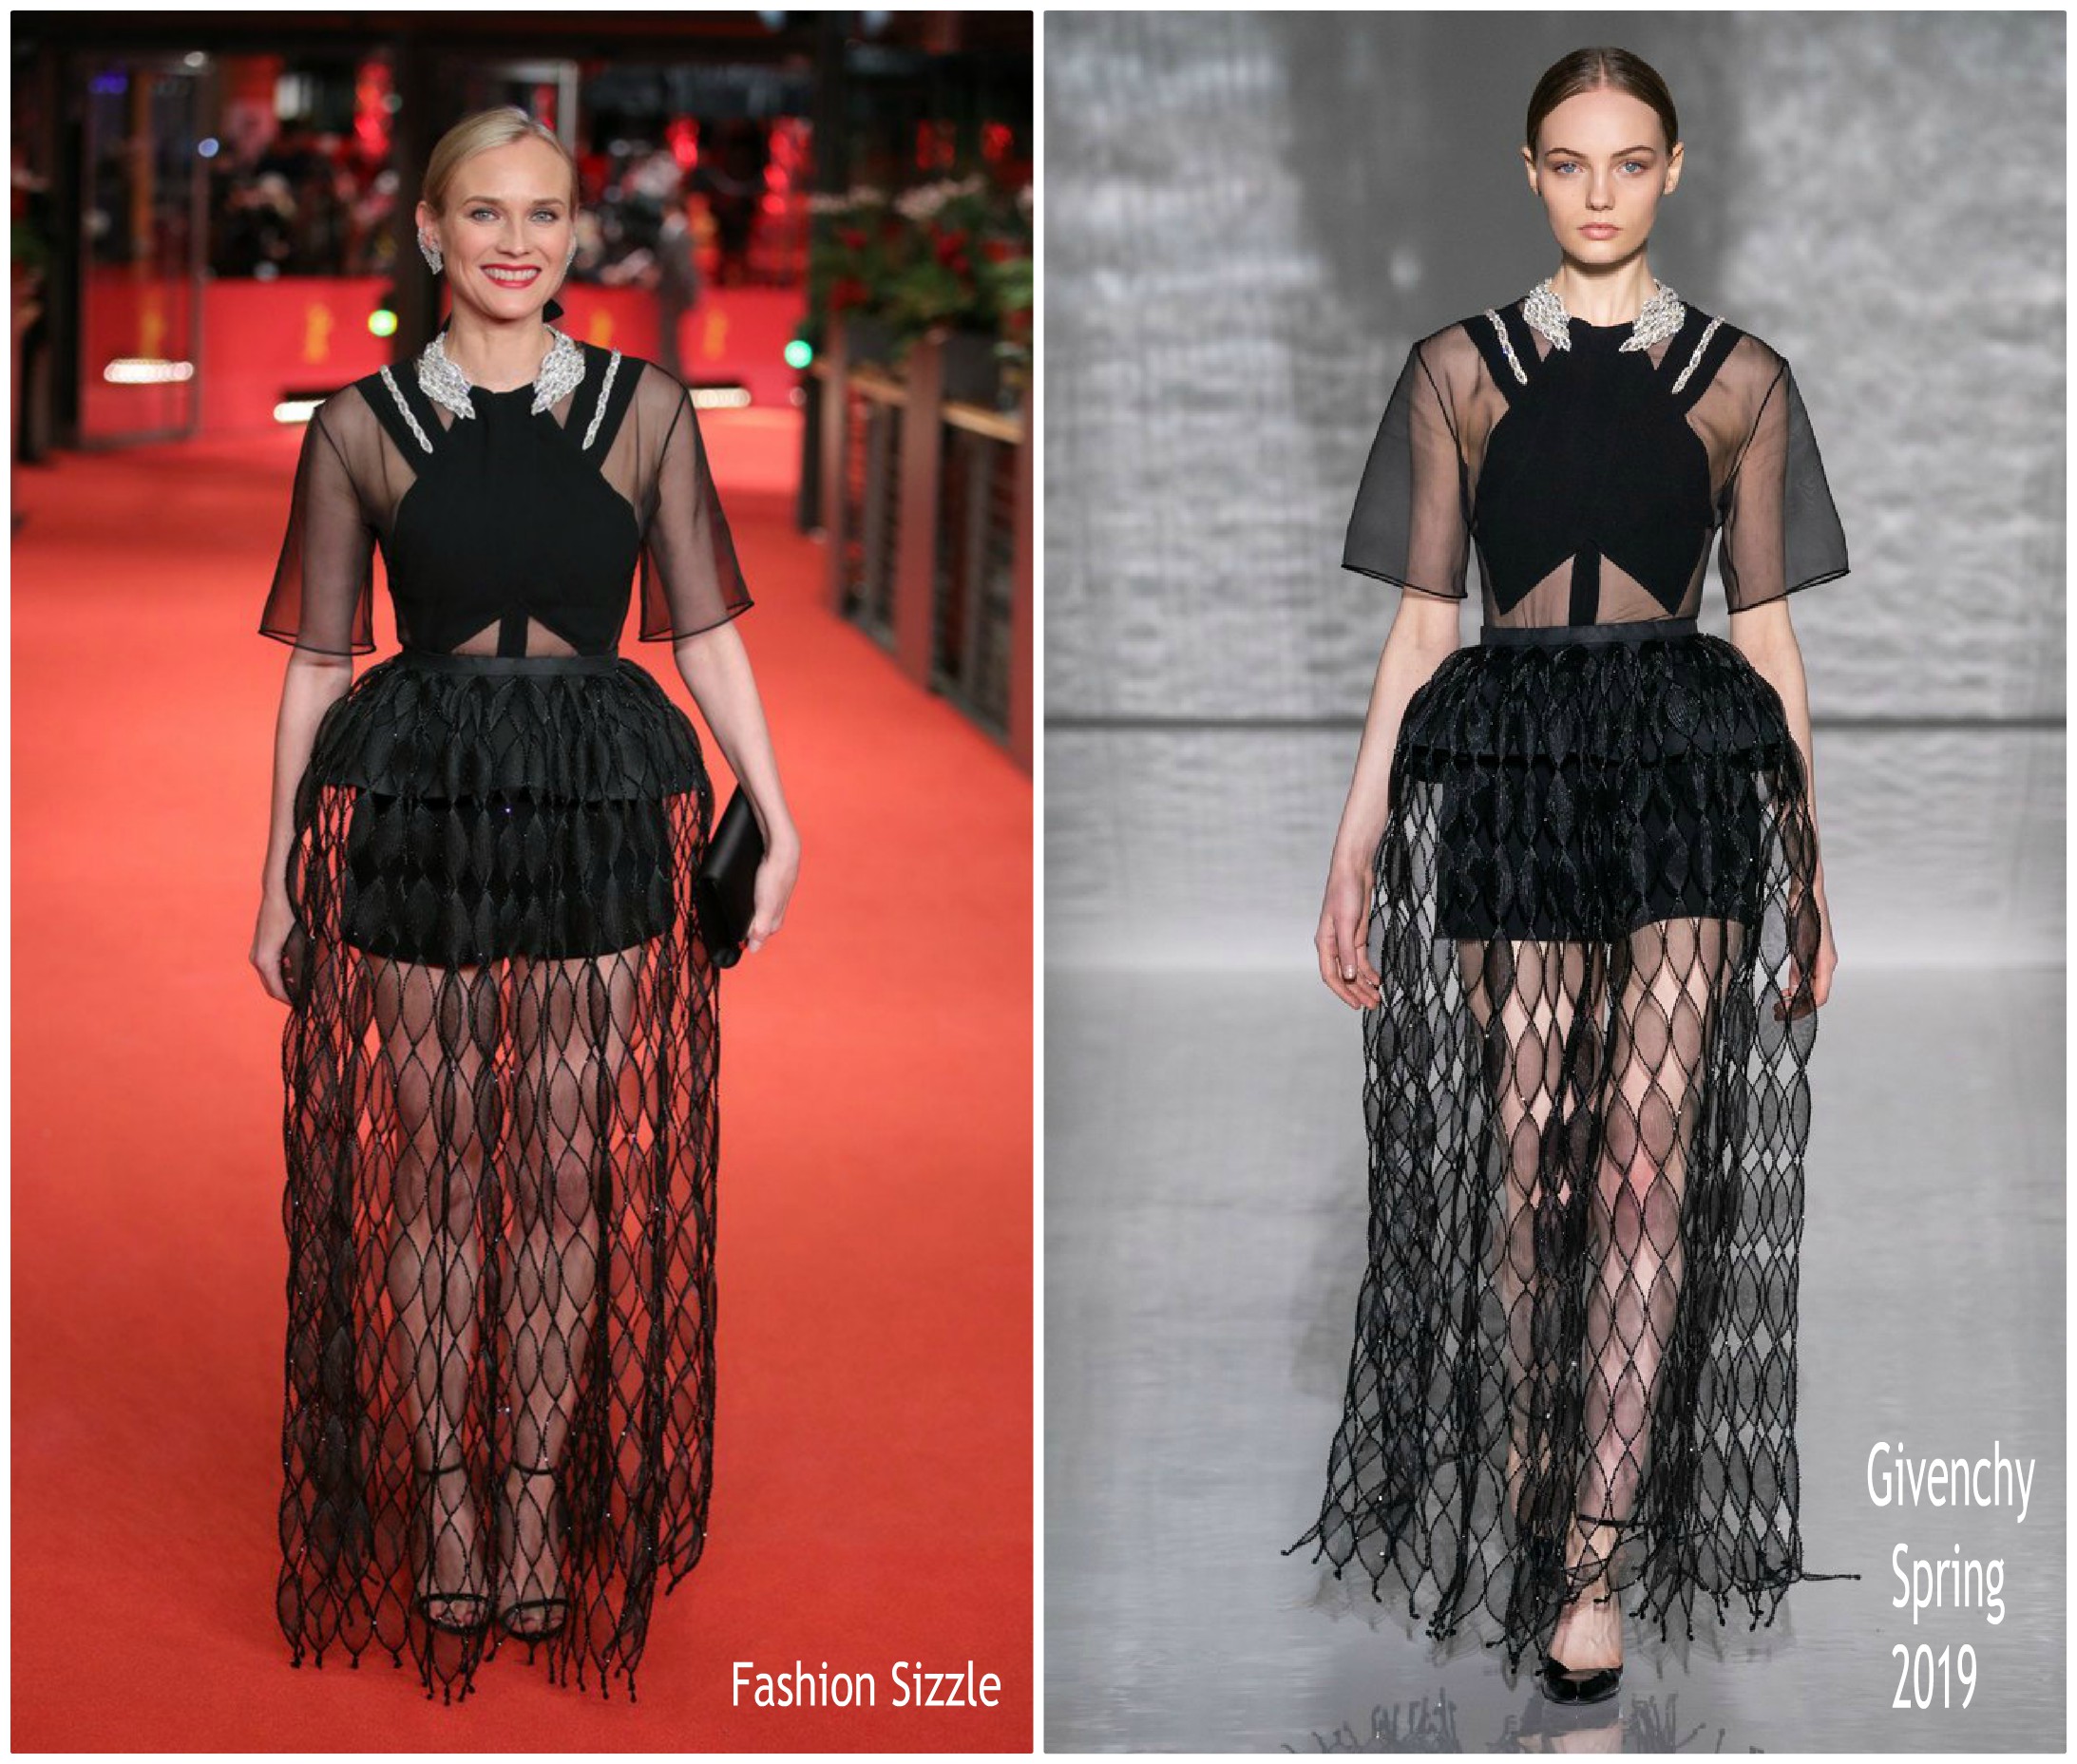 Diane Kruger In Givenchy Haute Couture @ ‘The Operative’ Berlinale Film Festival Premiere